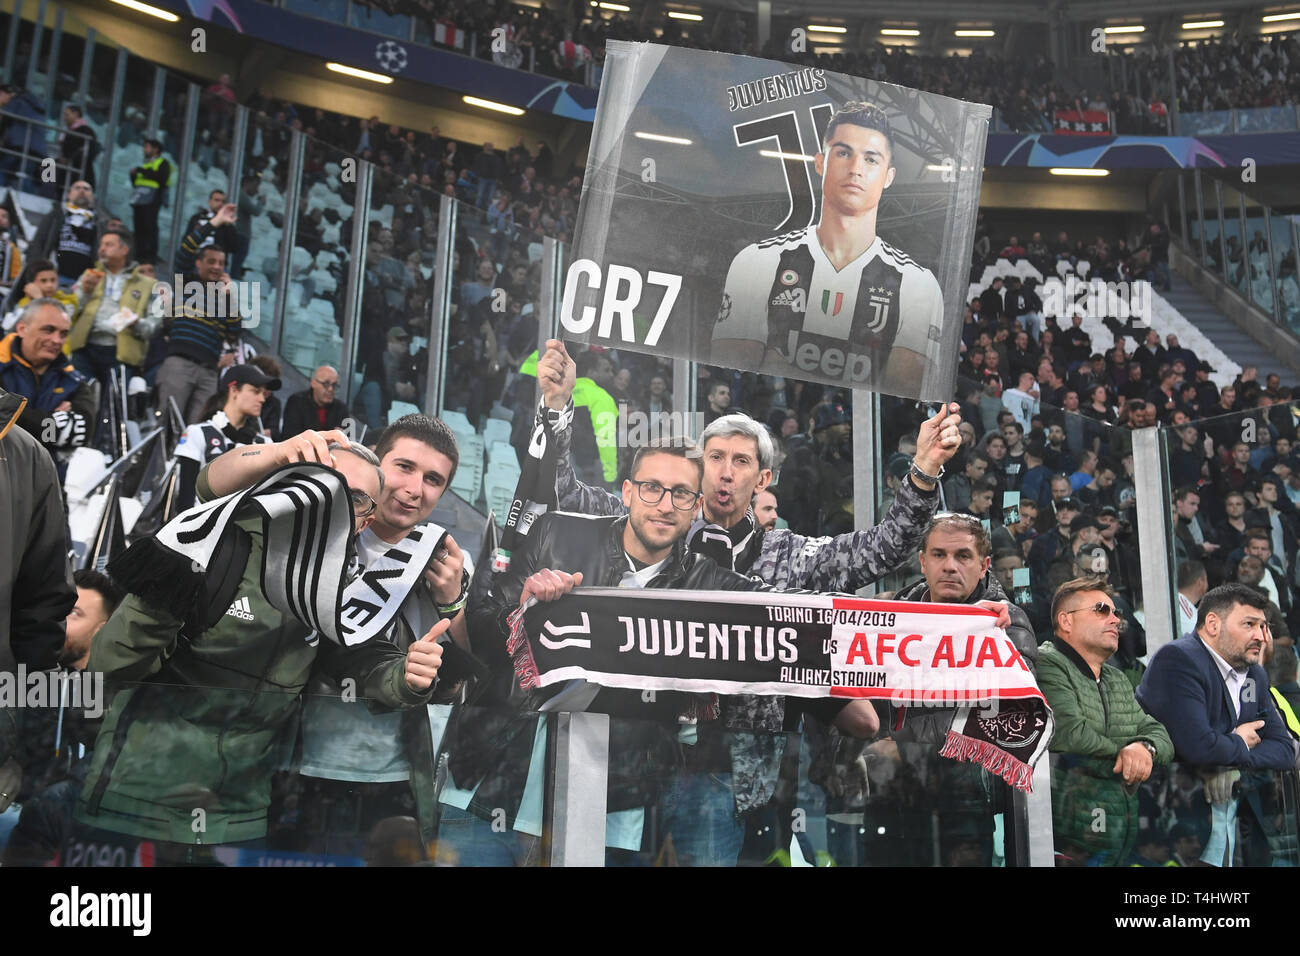 Turin, Italy. 16th Apr, 2019. Soccer: Champions League, knockout round, quarter-finals, second leg, Juventus Turin - Ajax Amsterdam. Fans of Juventus in the stands. Credit: Antonio Polia/dpa/Alamy Live News Stock Photo